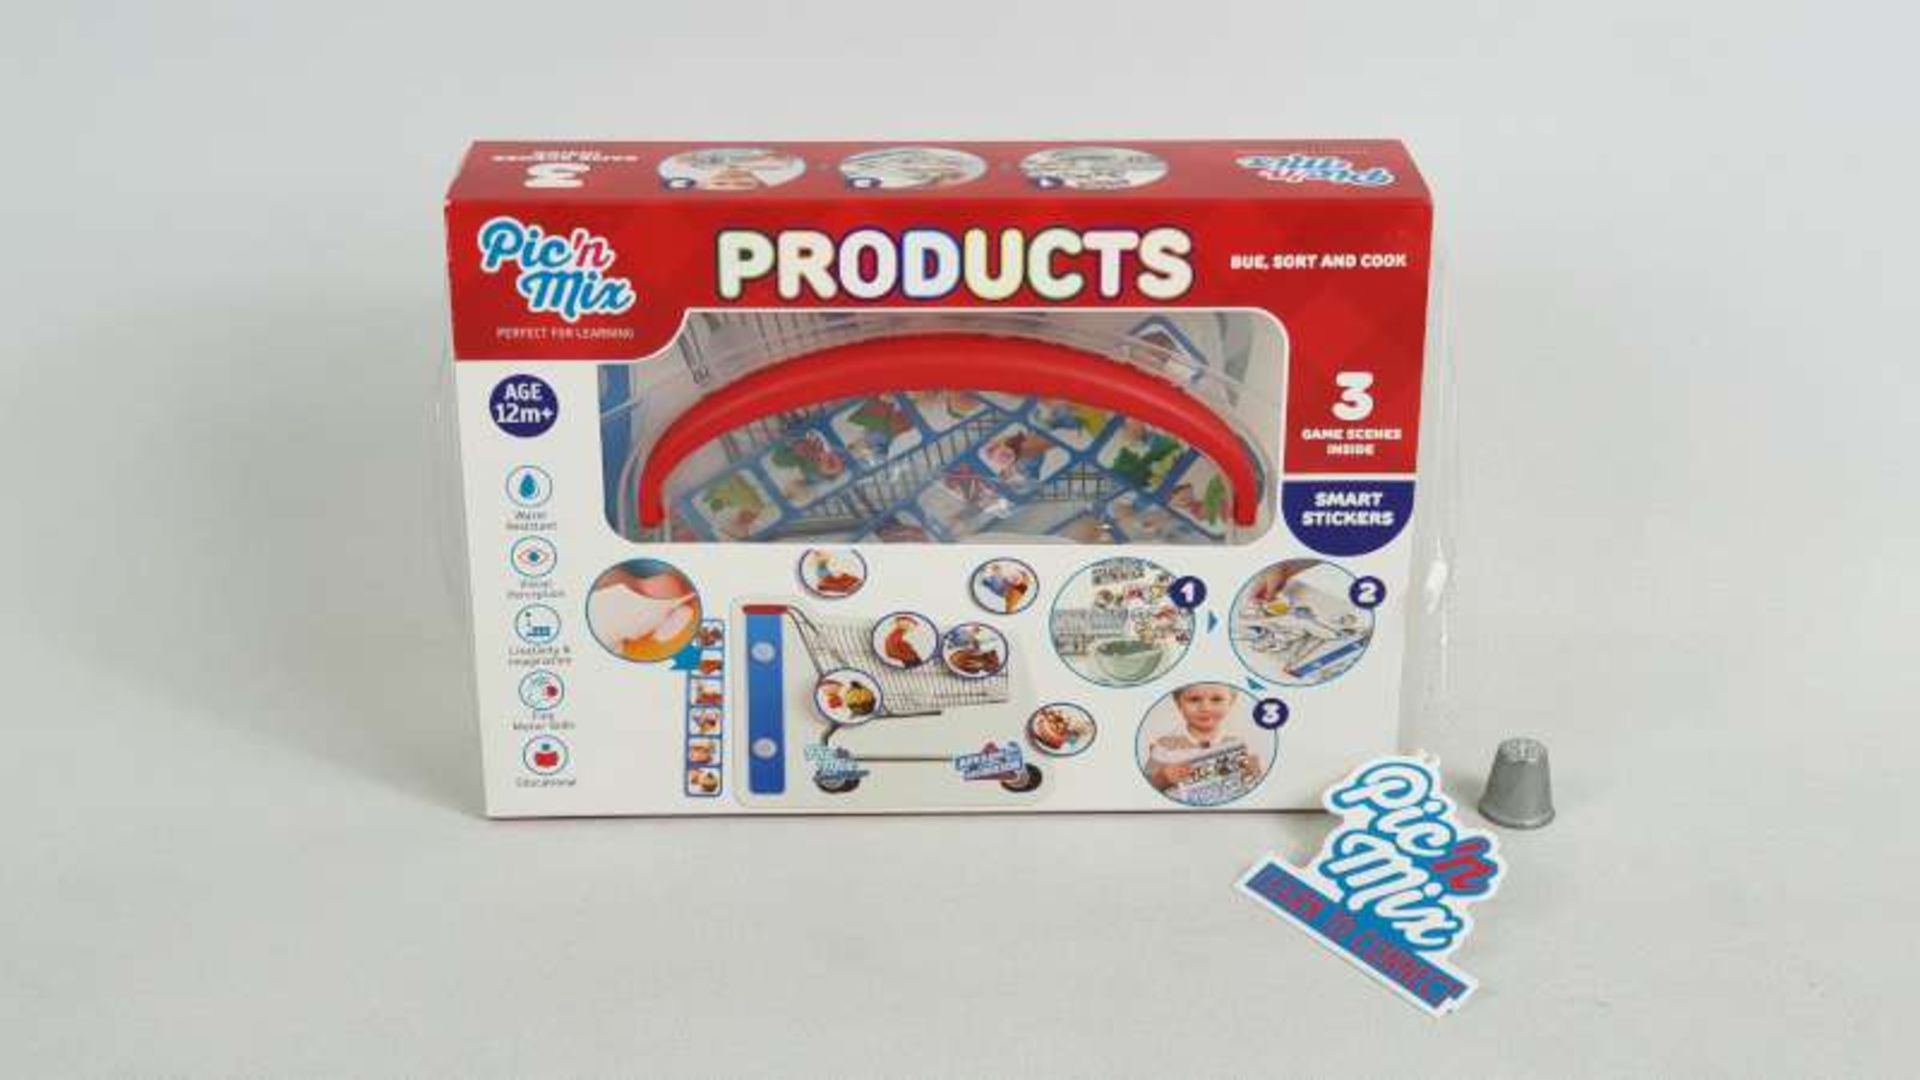 24 X BRAND NEW BOXED PIC N MIX PRODUCTS EDUCATIONAL LEARNING GAMES IN 1 BOX